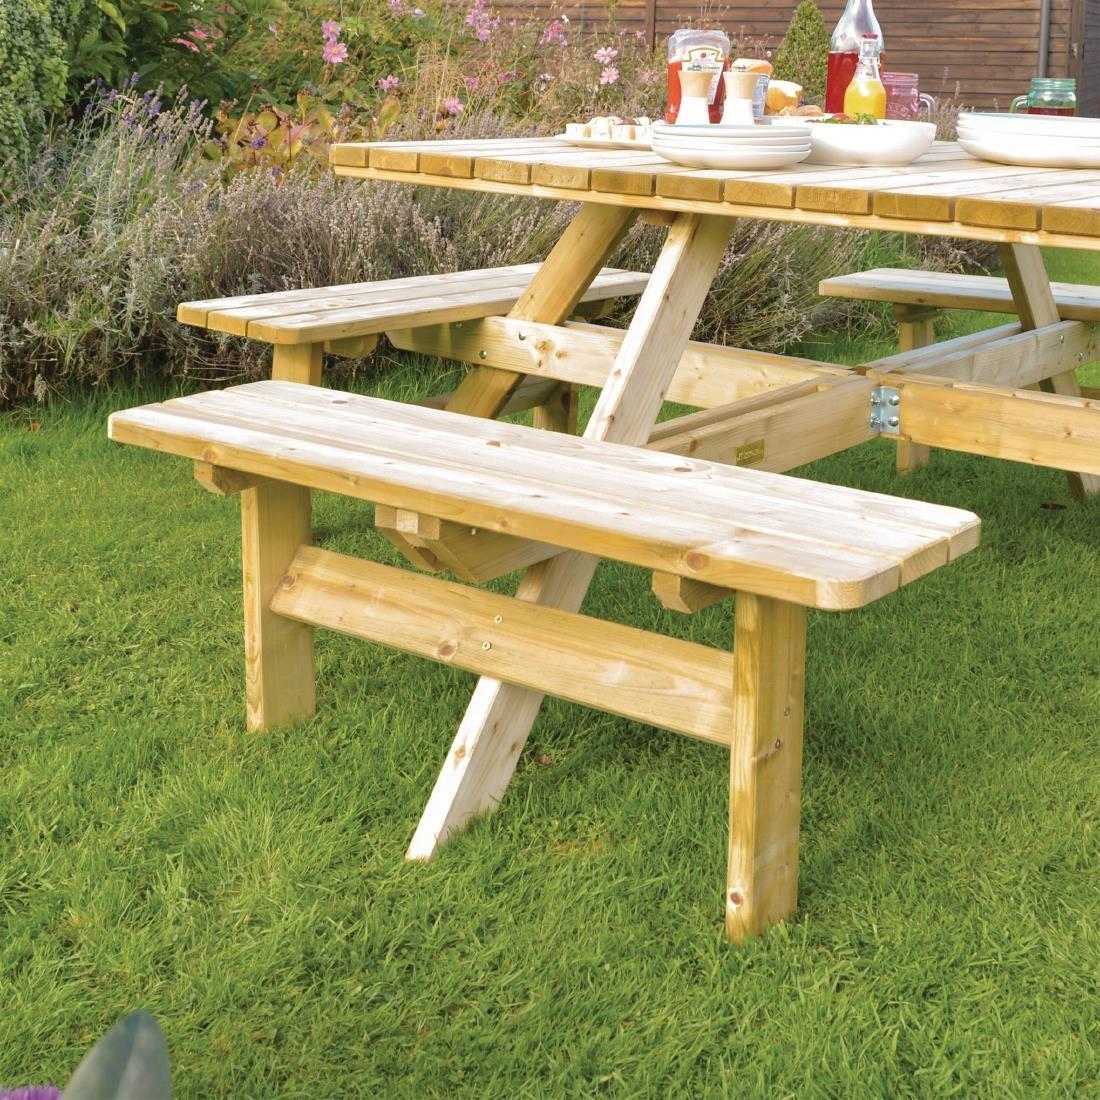 Rowlinson Square Wooden Picnic Table 6.5ft - CG096  - 4